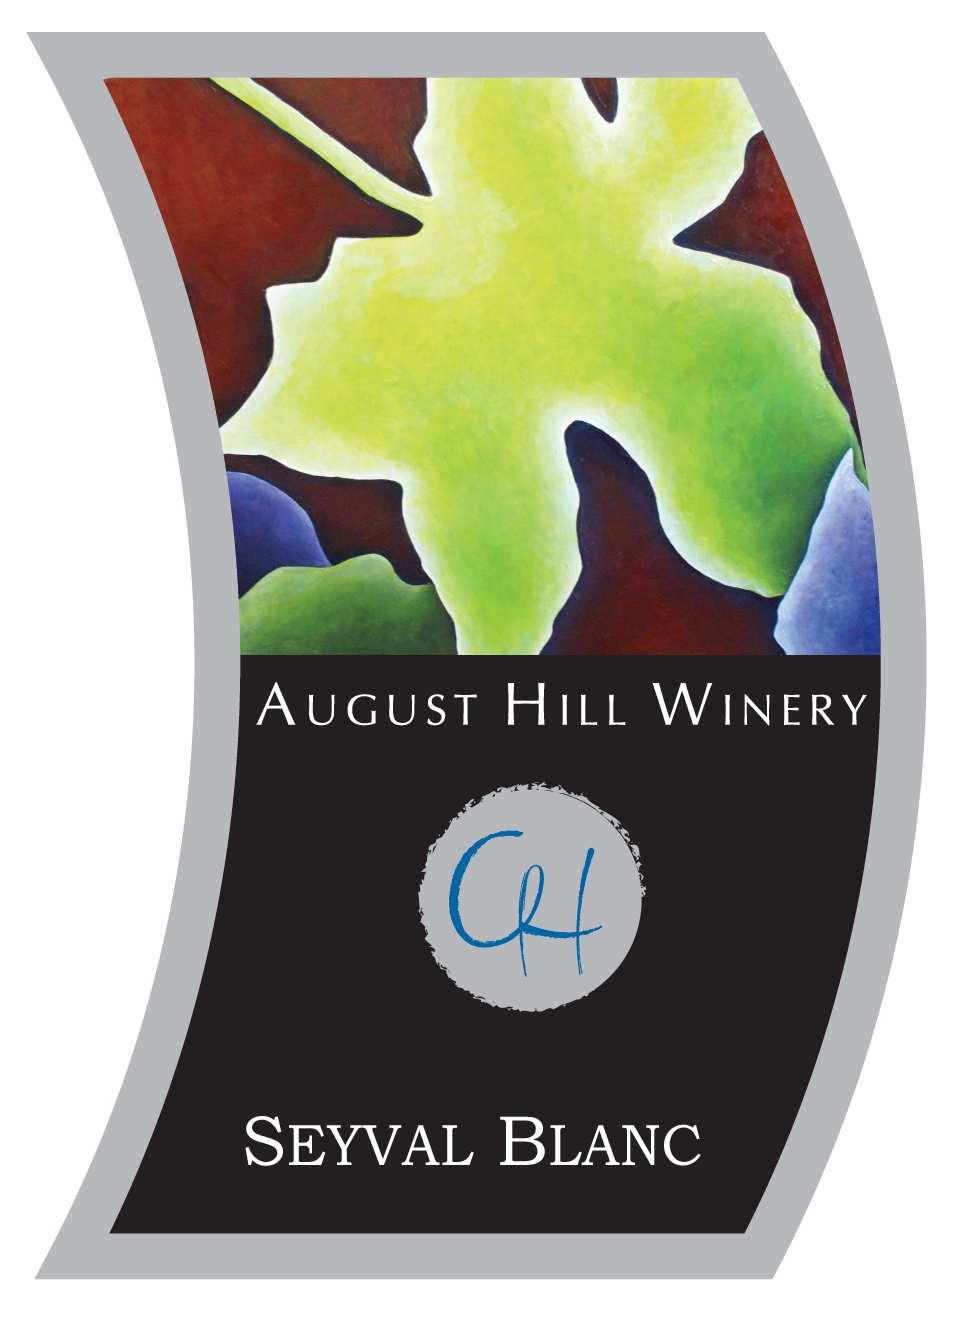 00 refreshing with pear, white peach & pineapple flavors; great with seafood &